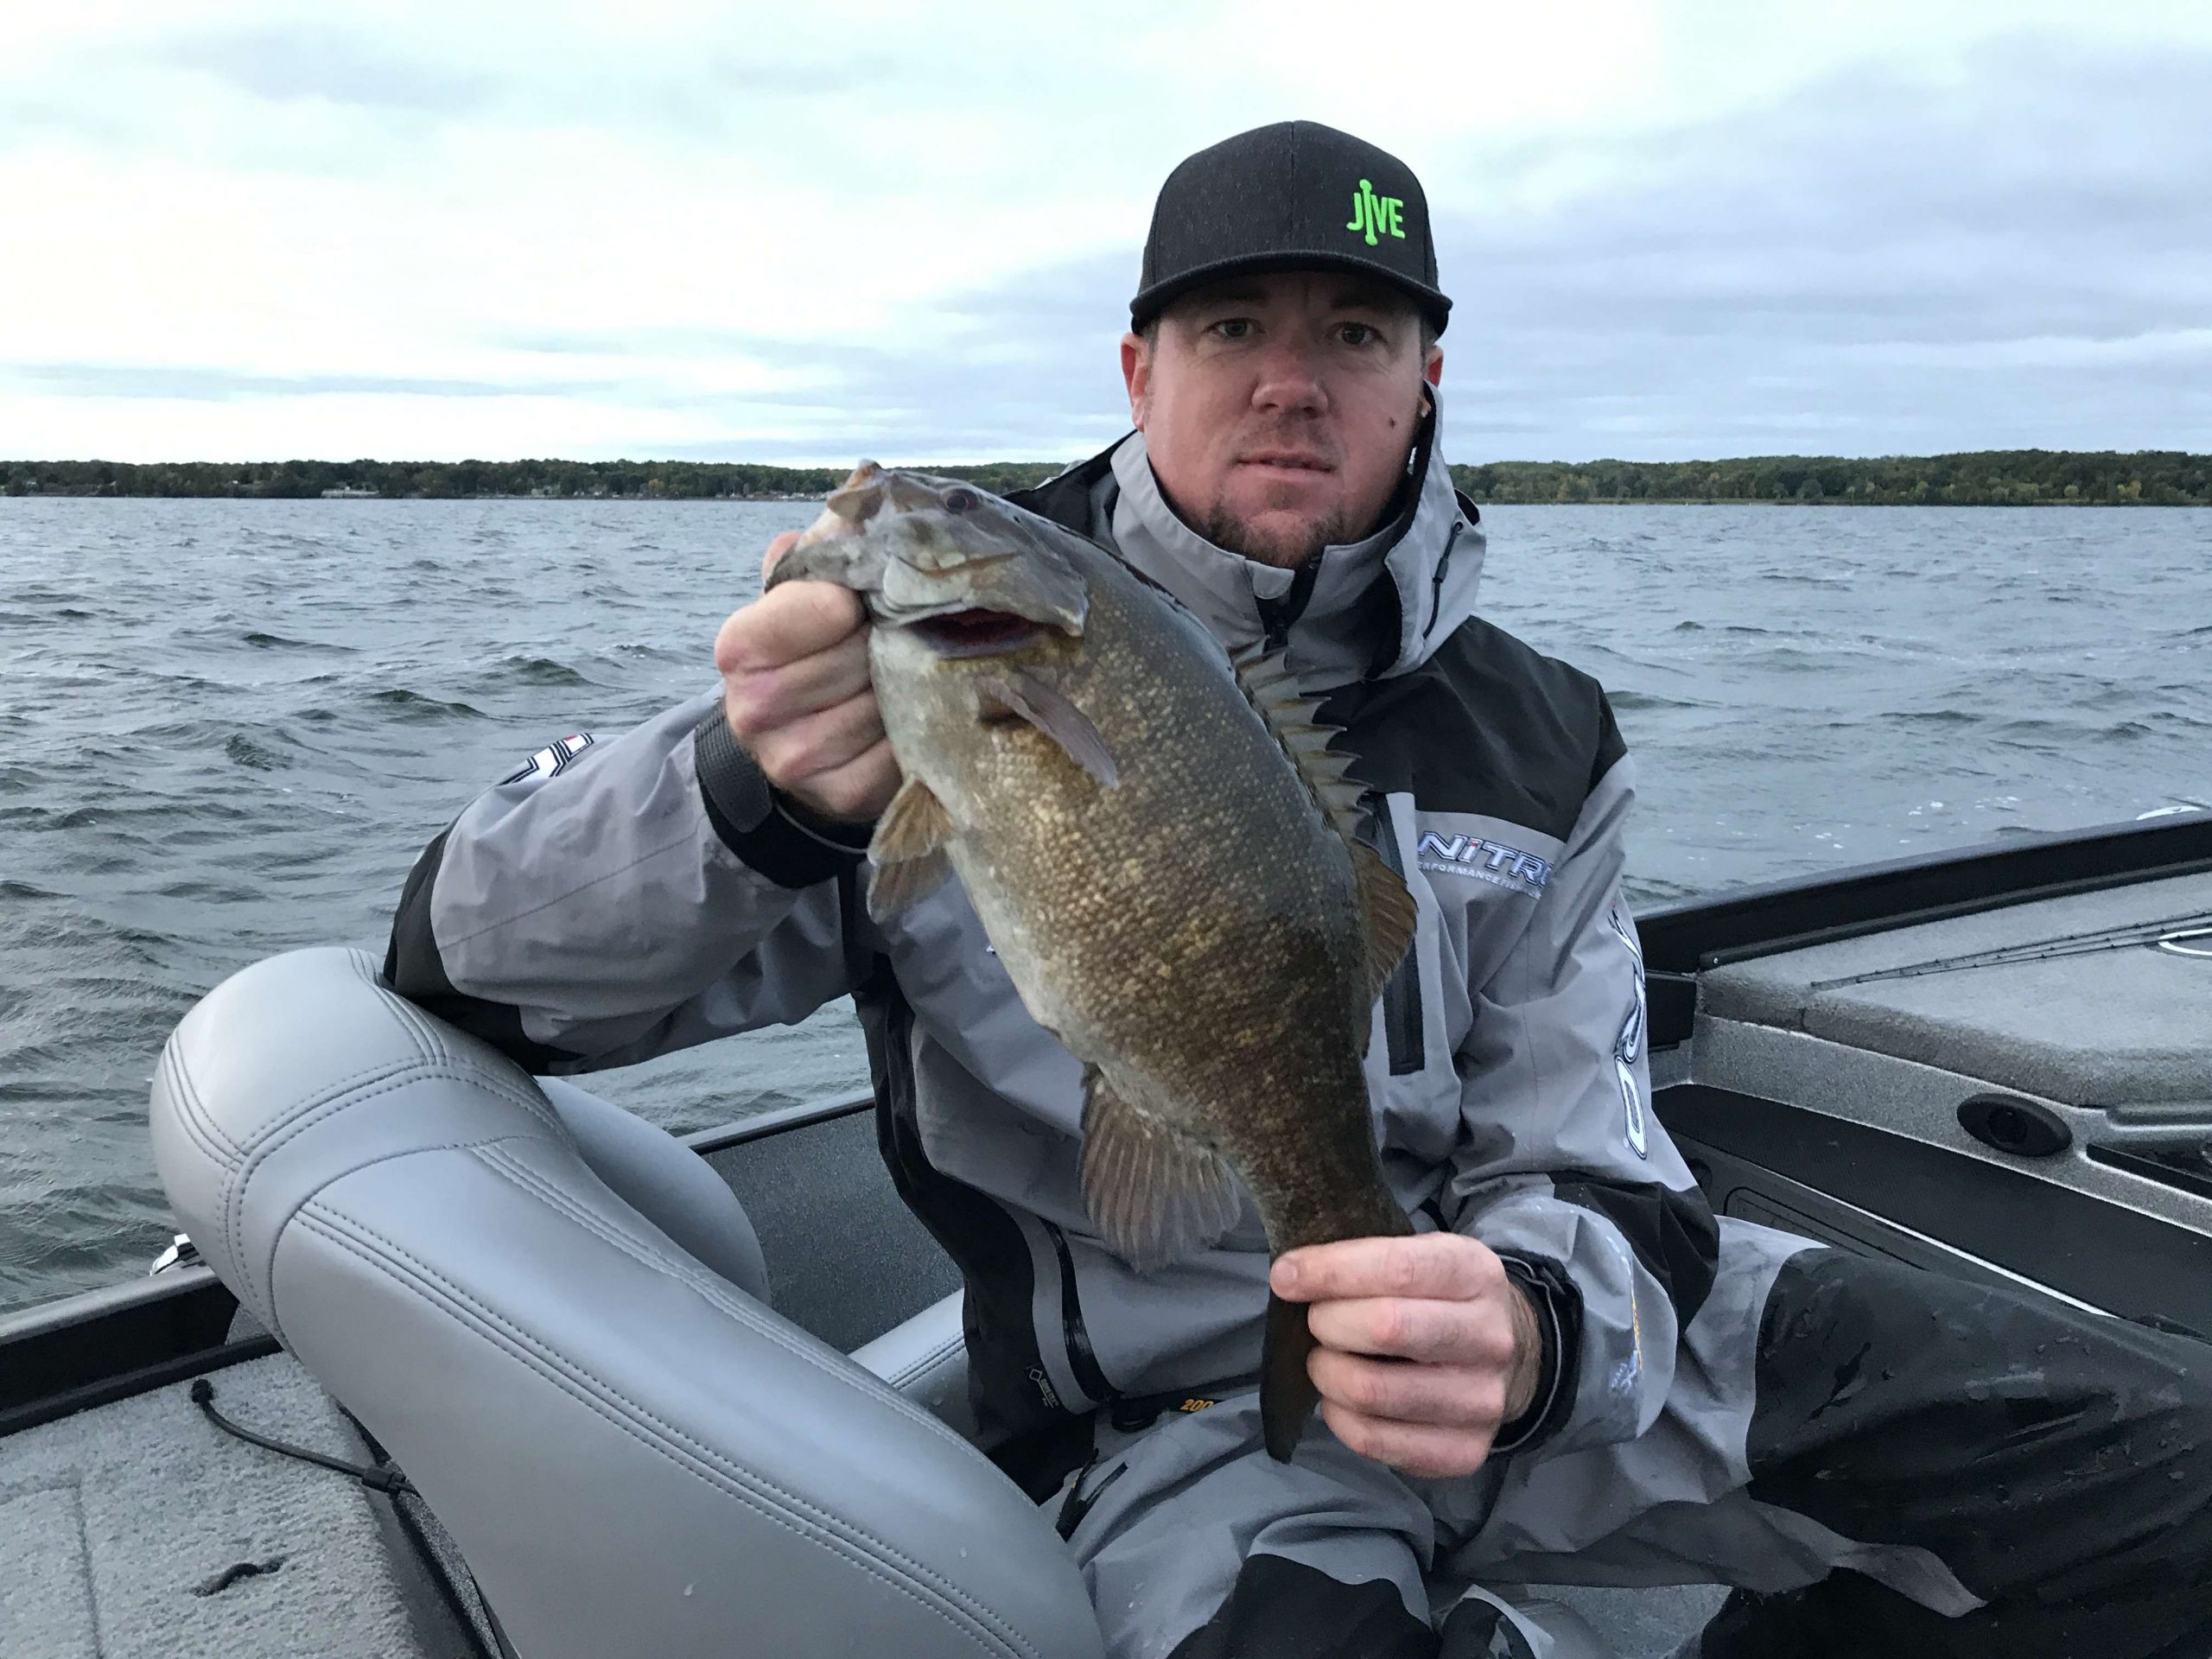 First five minutes of the day on Mille Lacs, great start to the day for Jason Williamson